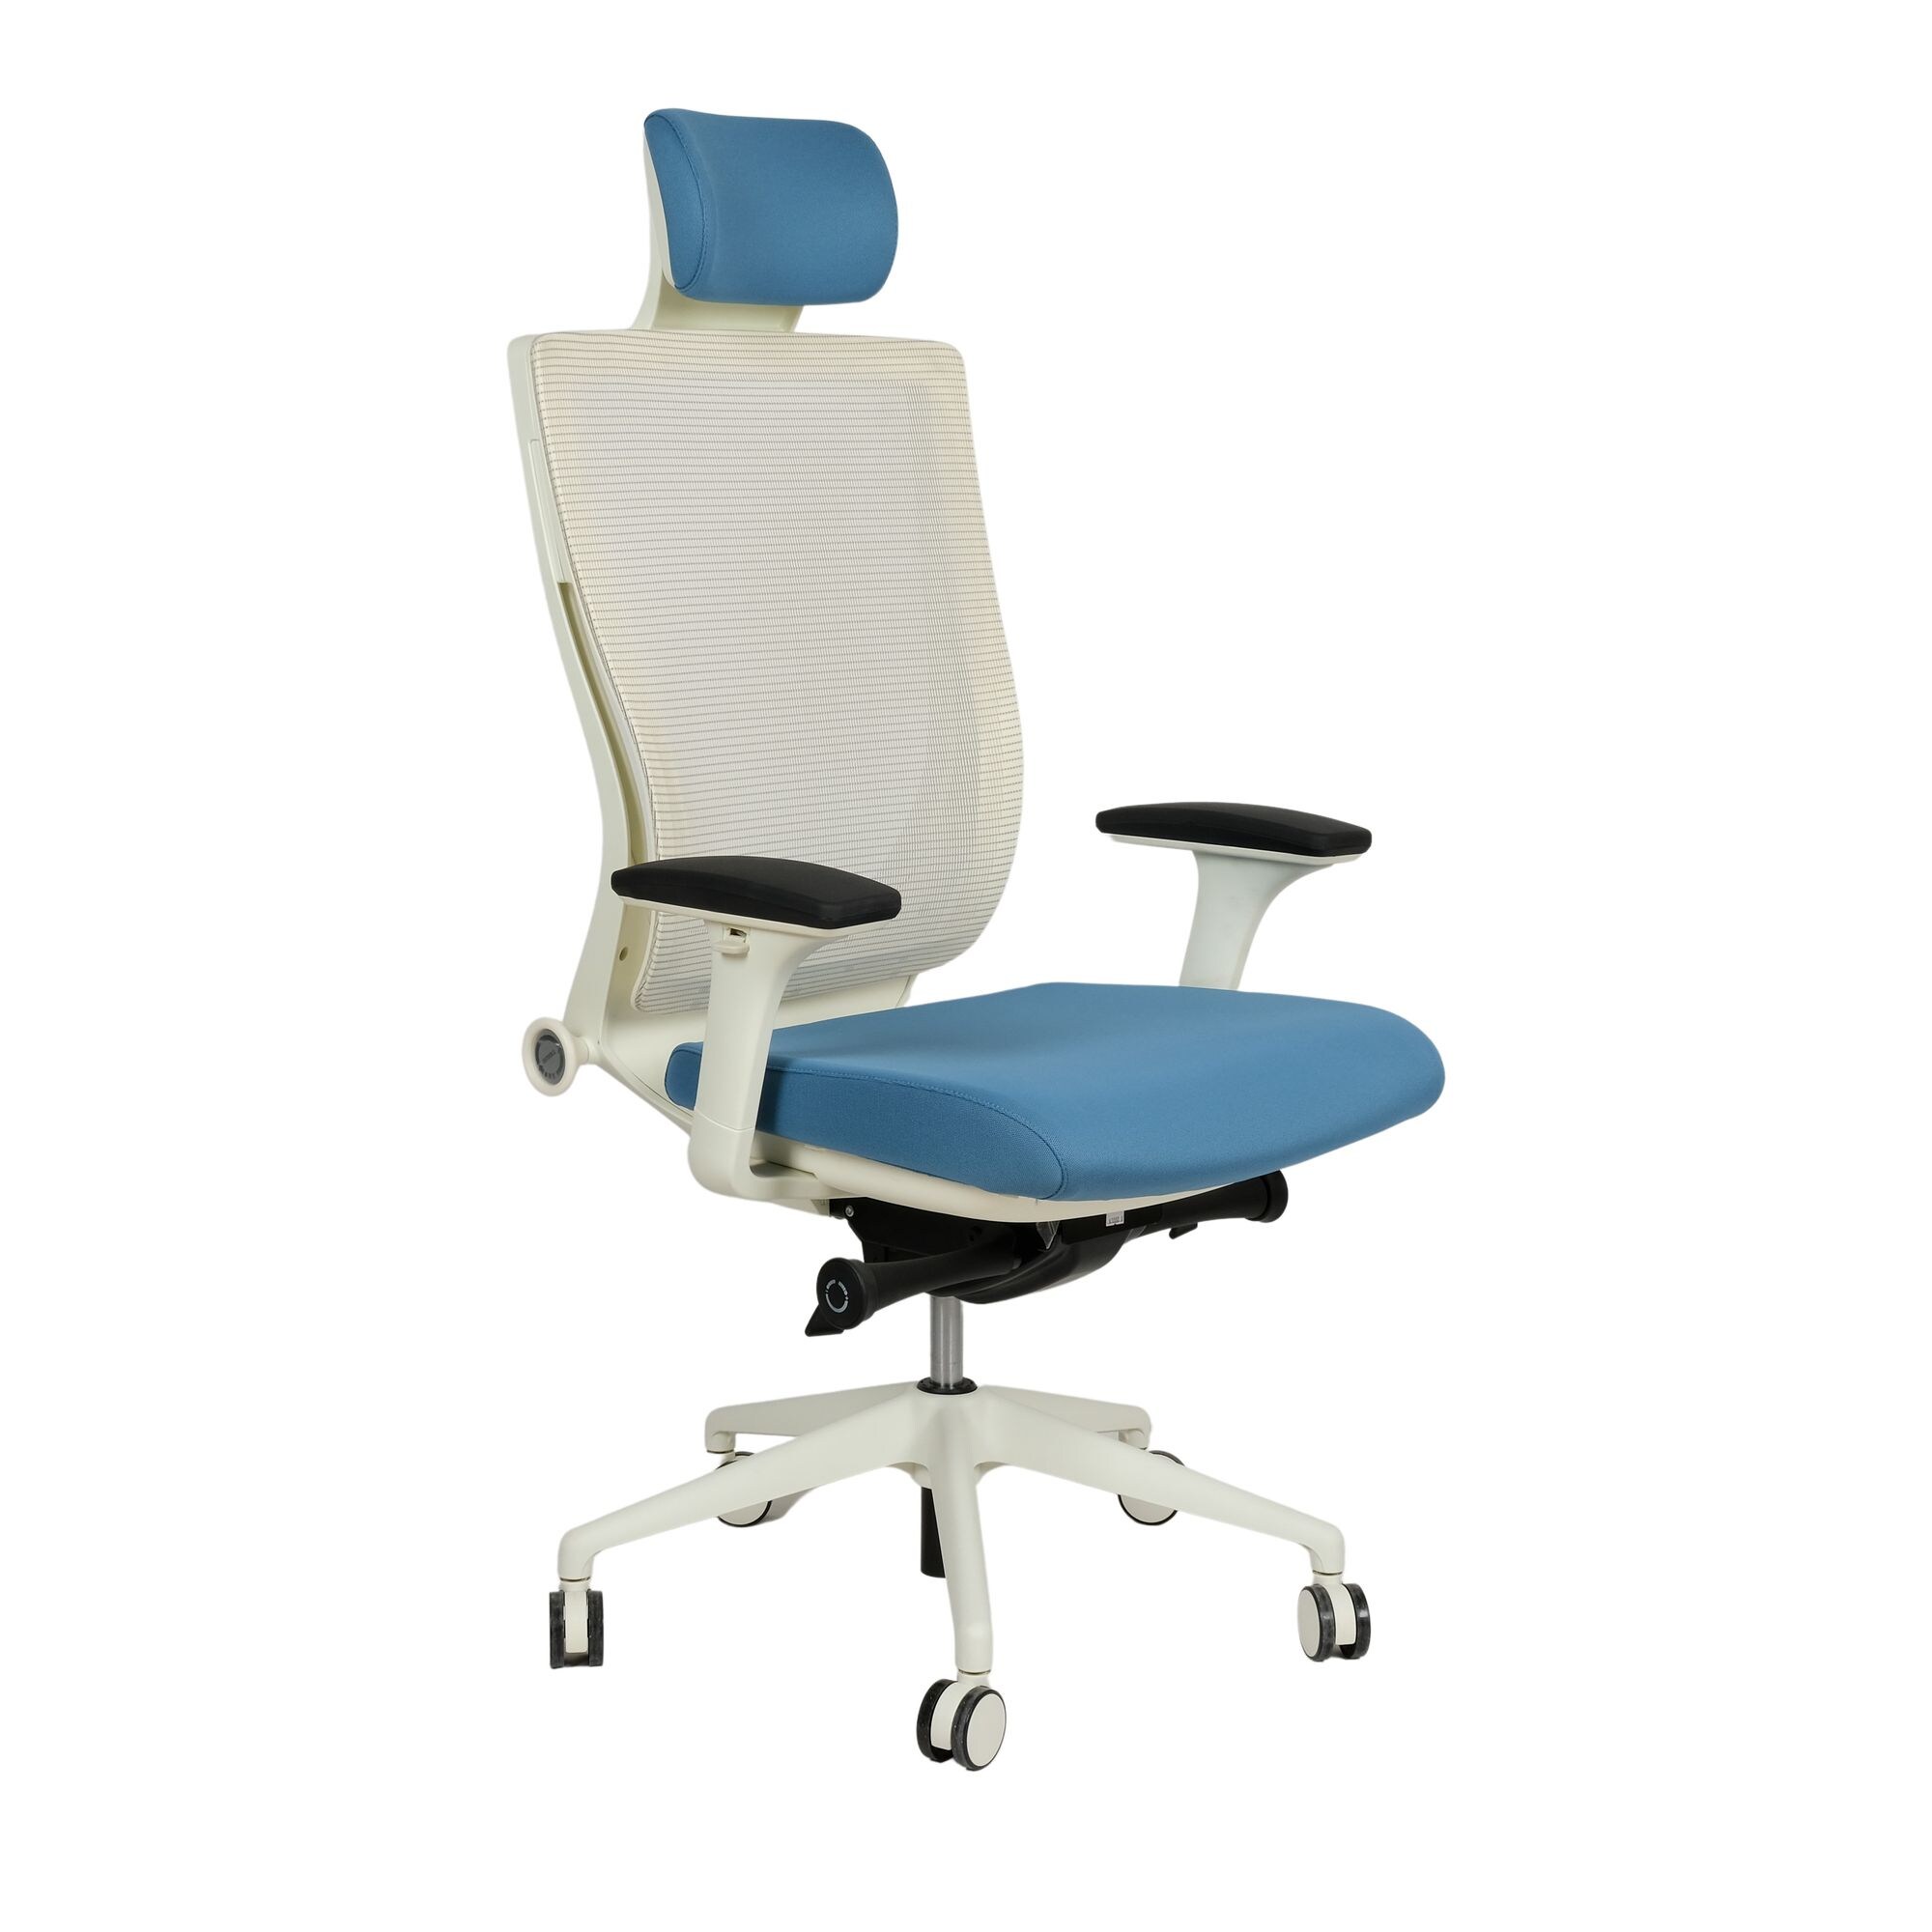 Exotic Chairs Adjustable Highback Executive Chair Trium, White & Blue